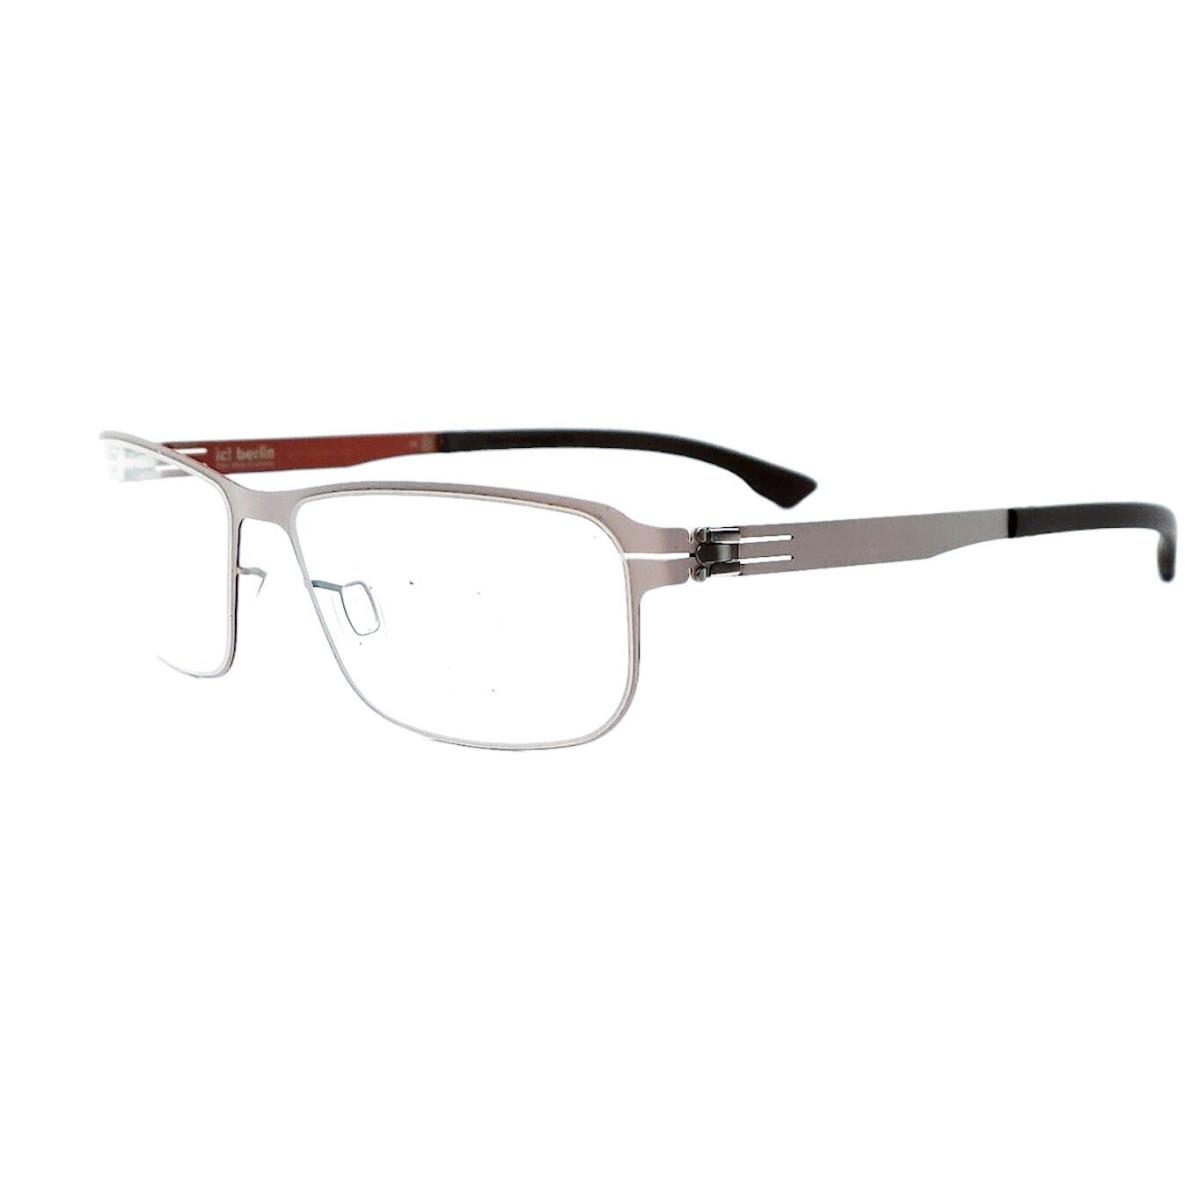 ic Berlin Andrew P. Eyeglasses Col. Dusty Ash Size 53